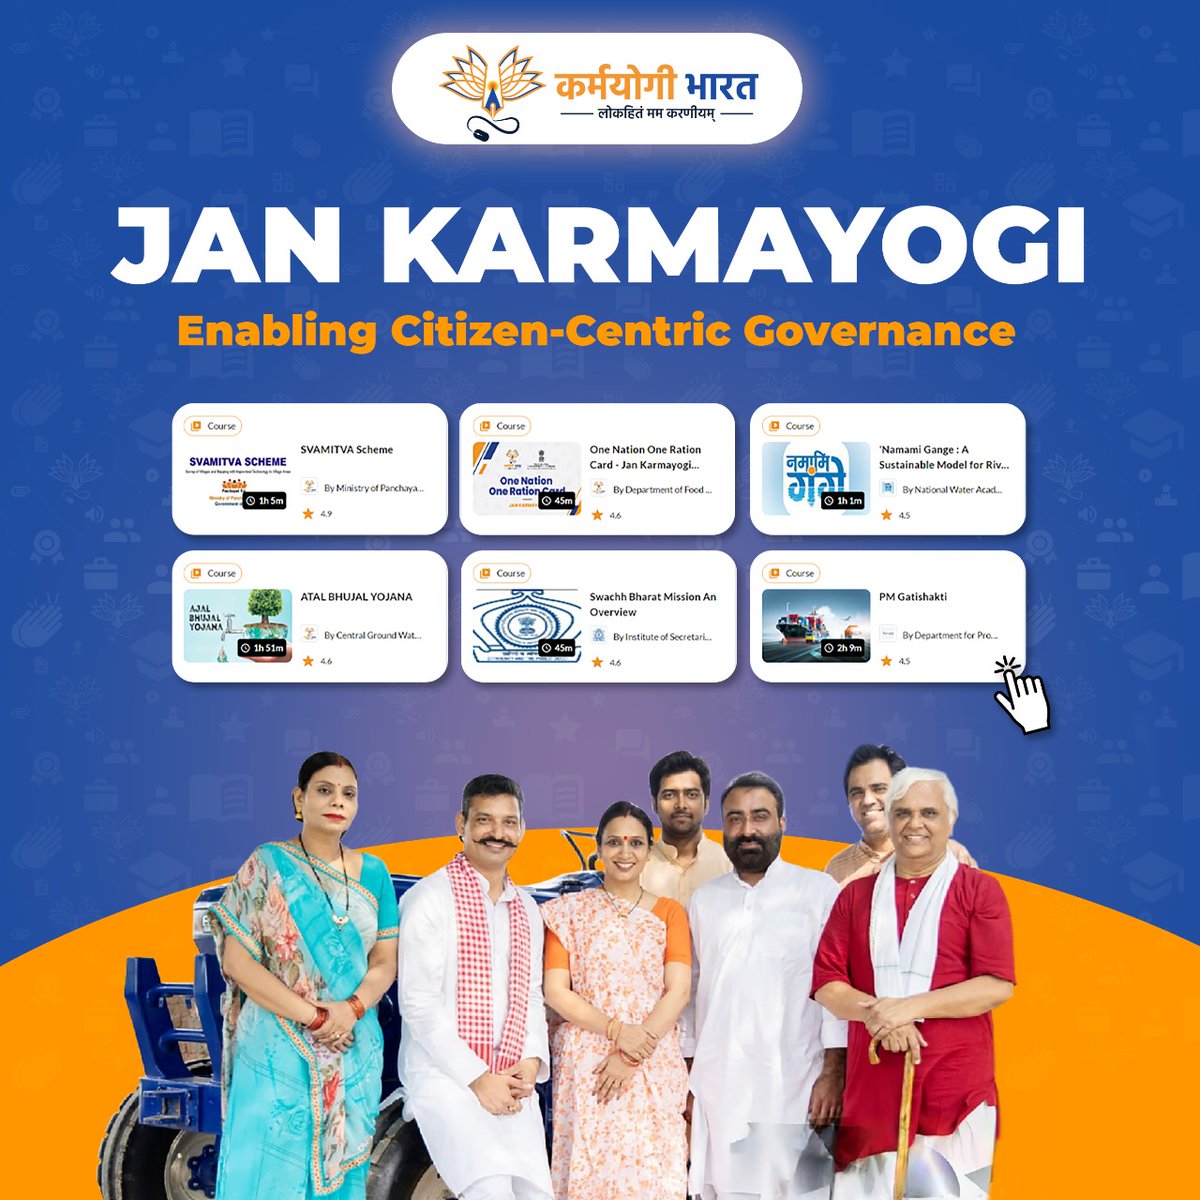 Transforming the way public services are delivered at the last mile! Presenting ‘Jan Karmayogi’ on #iGOT, aimed at equipping govt officials with the necessary skills & knowledge to better serve the citizens at the grassroots level & address their social & economic welfare.